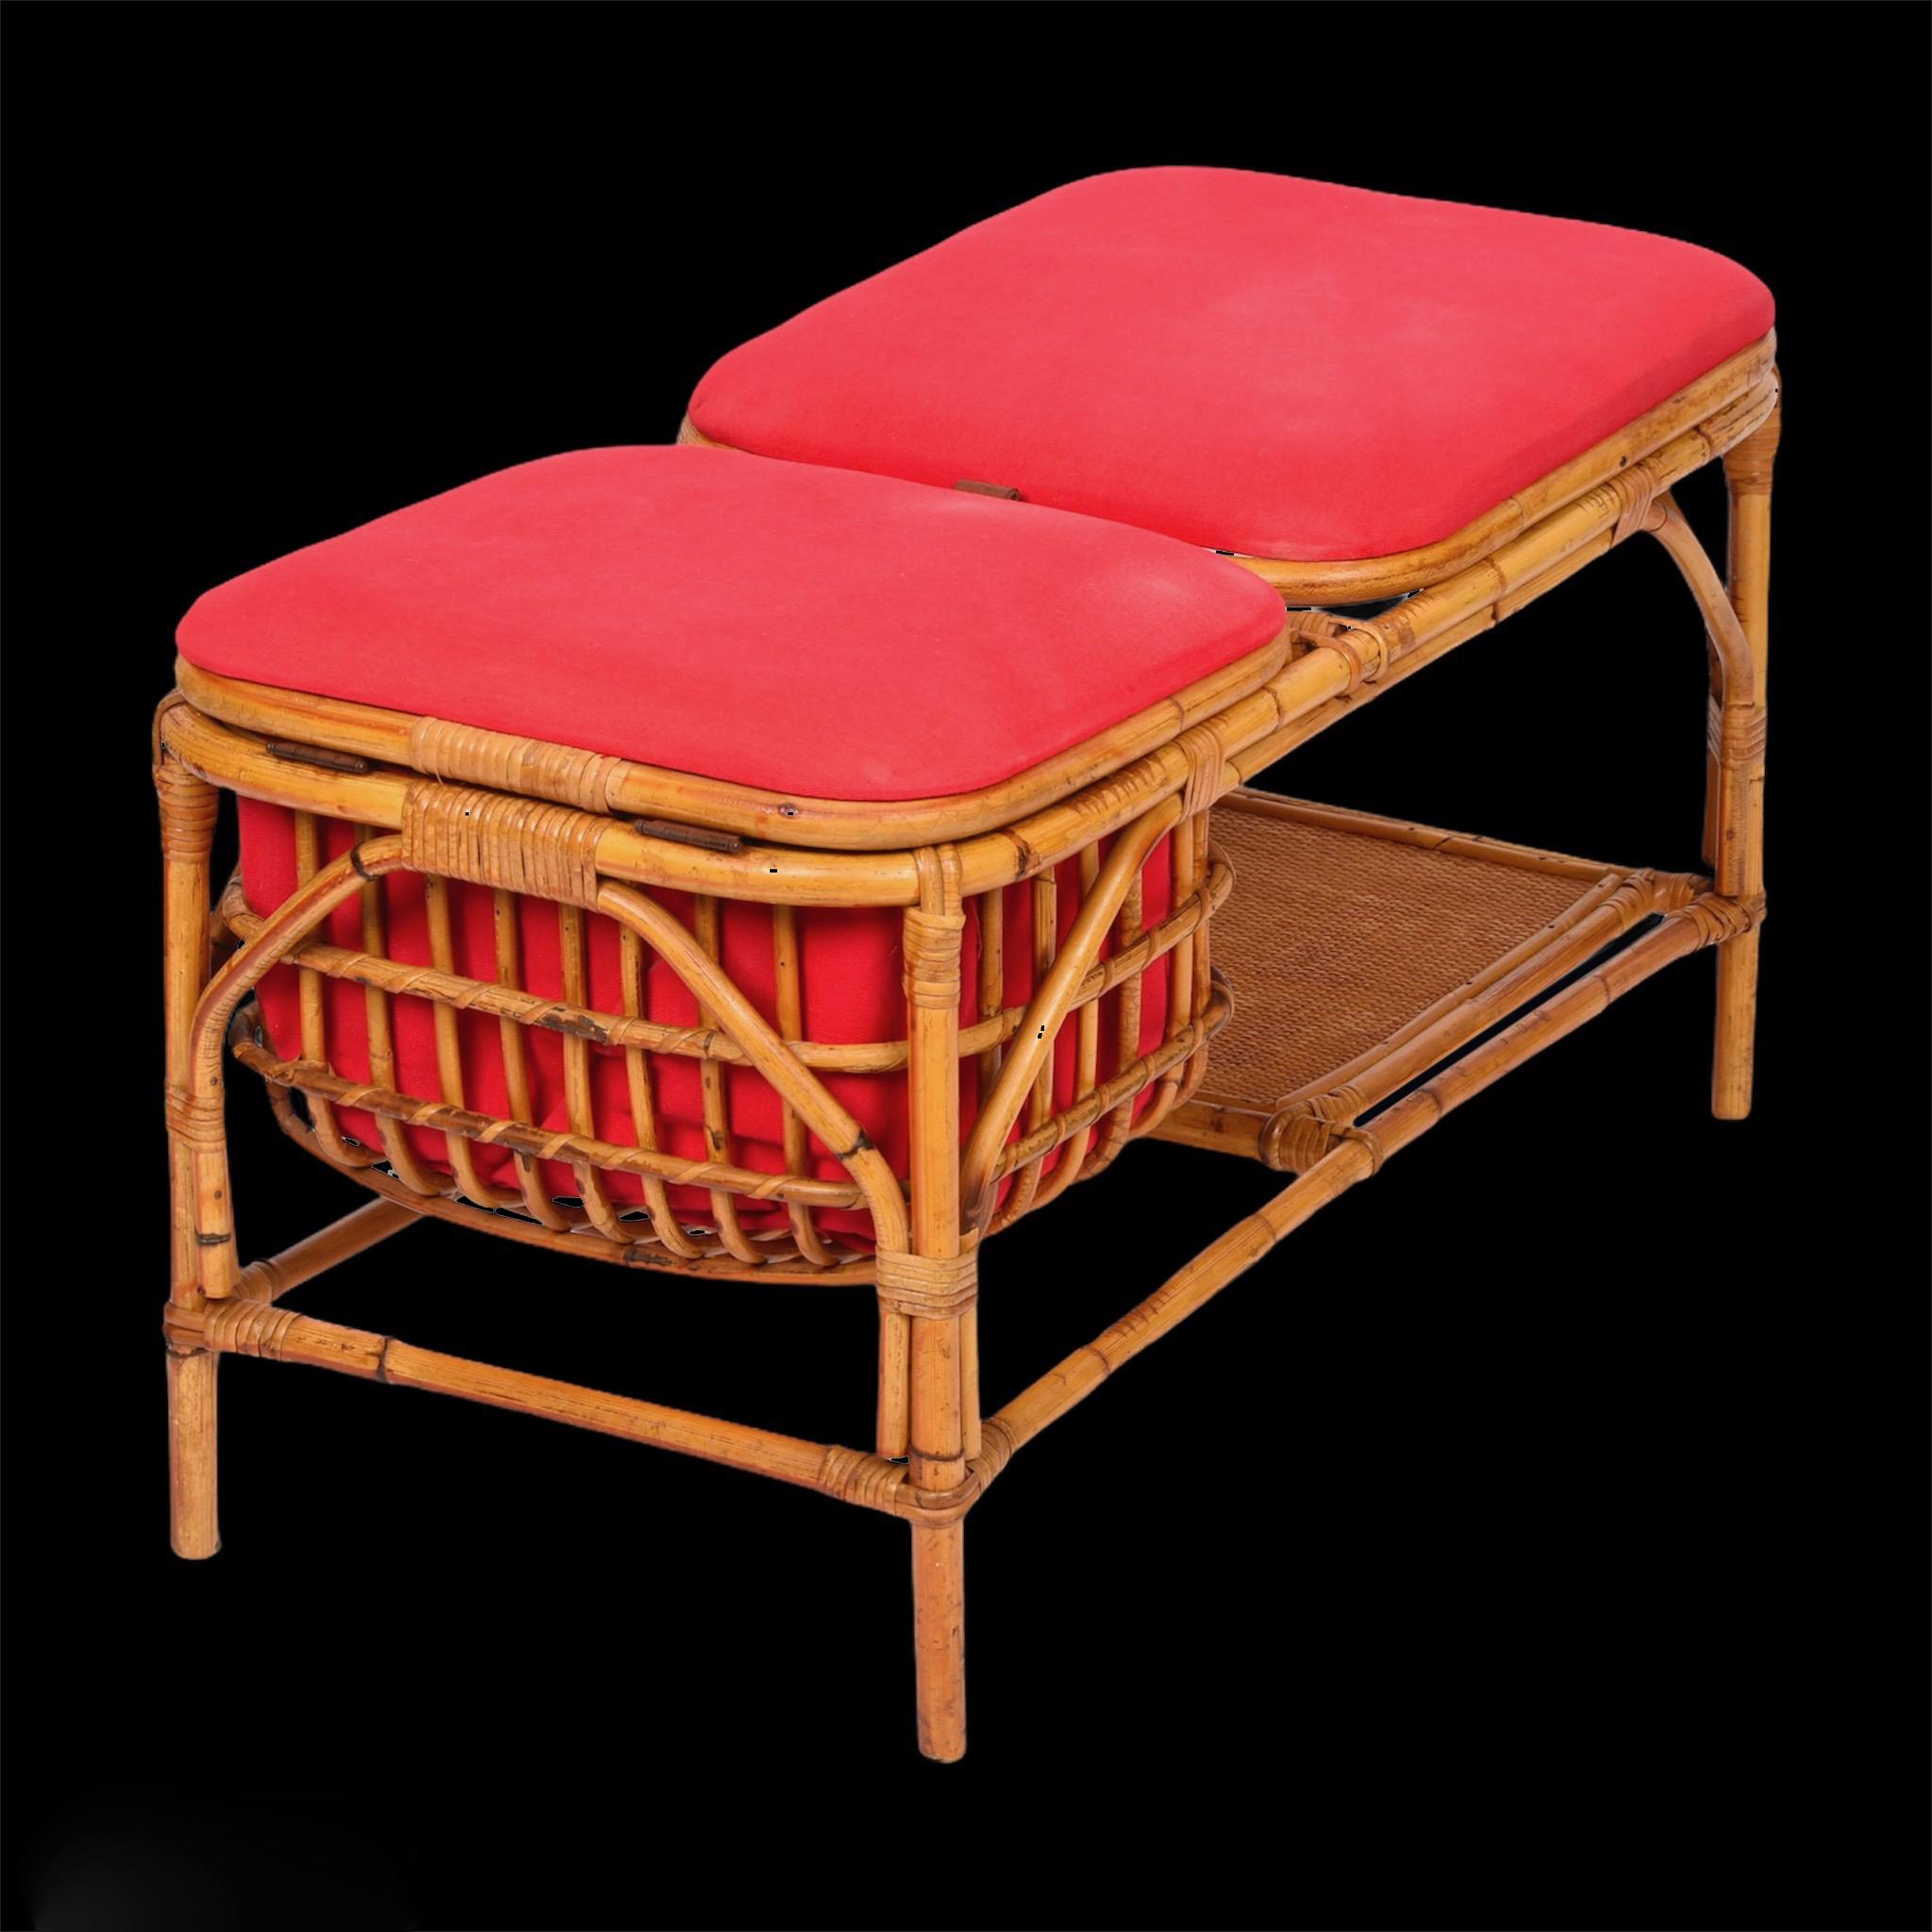 Midcentury Bamboo and Rattan Italian Bench with Box Case, 1950s For Sale 1